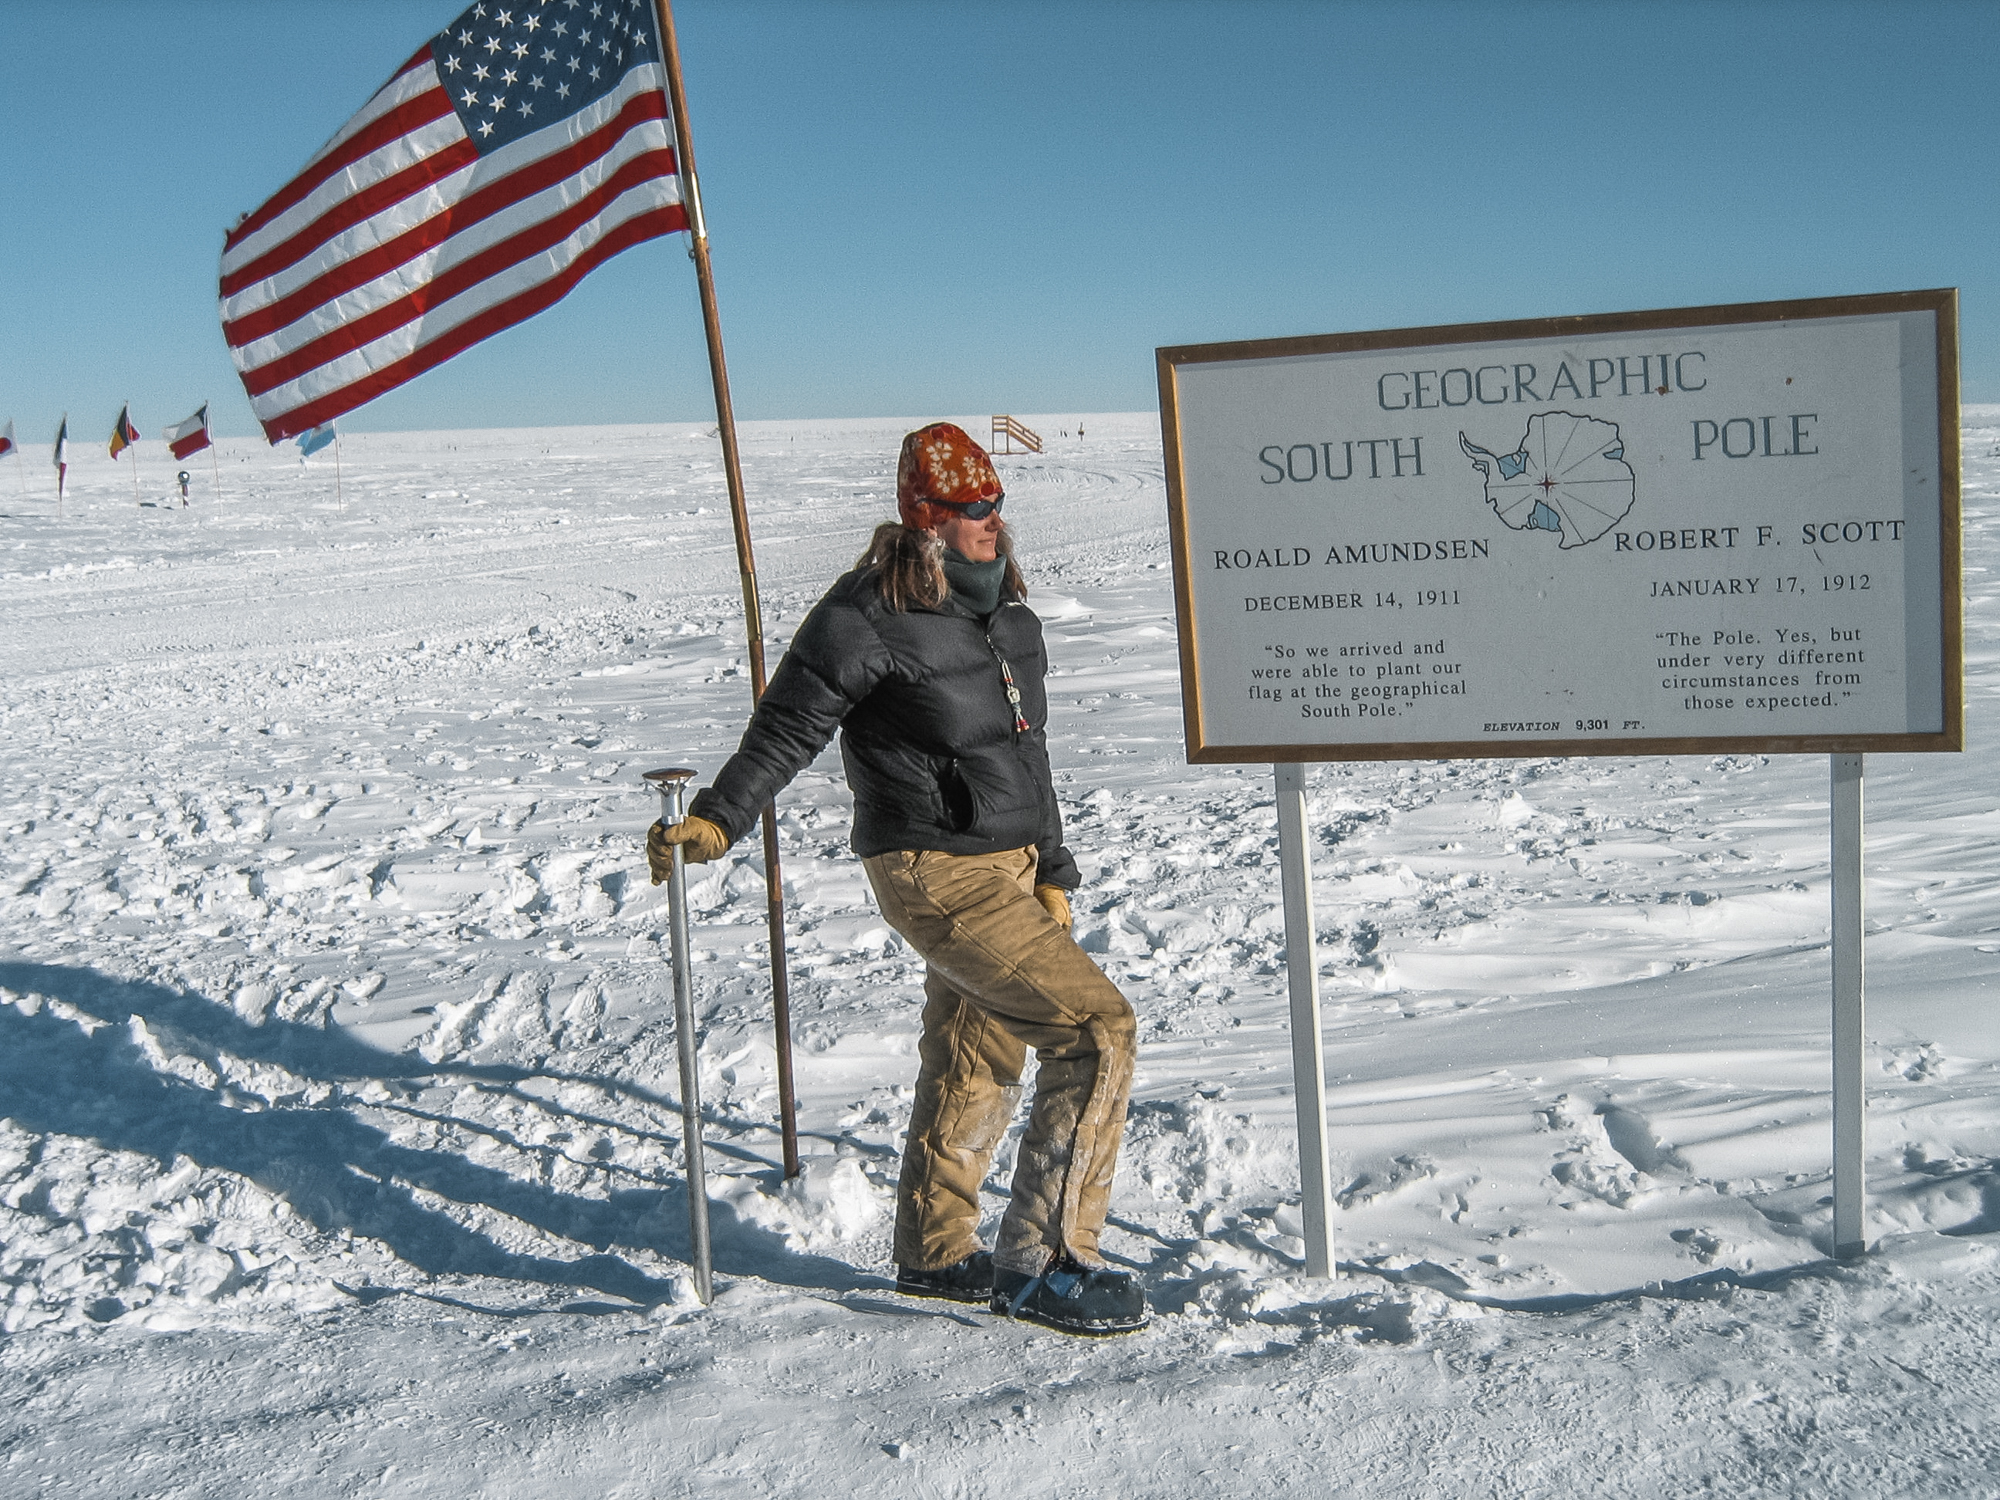 Thompson stands at the marker for the geographic South Pole